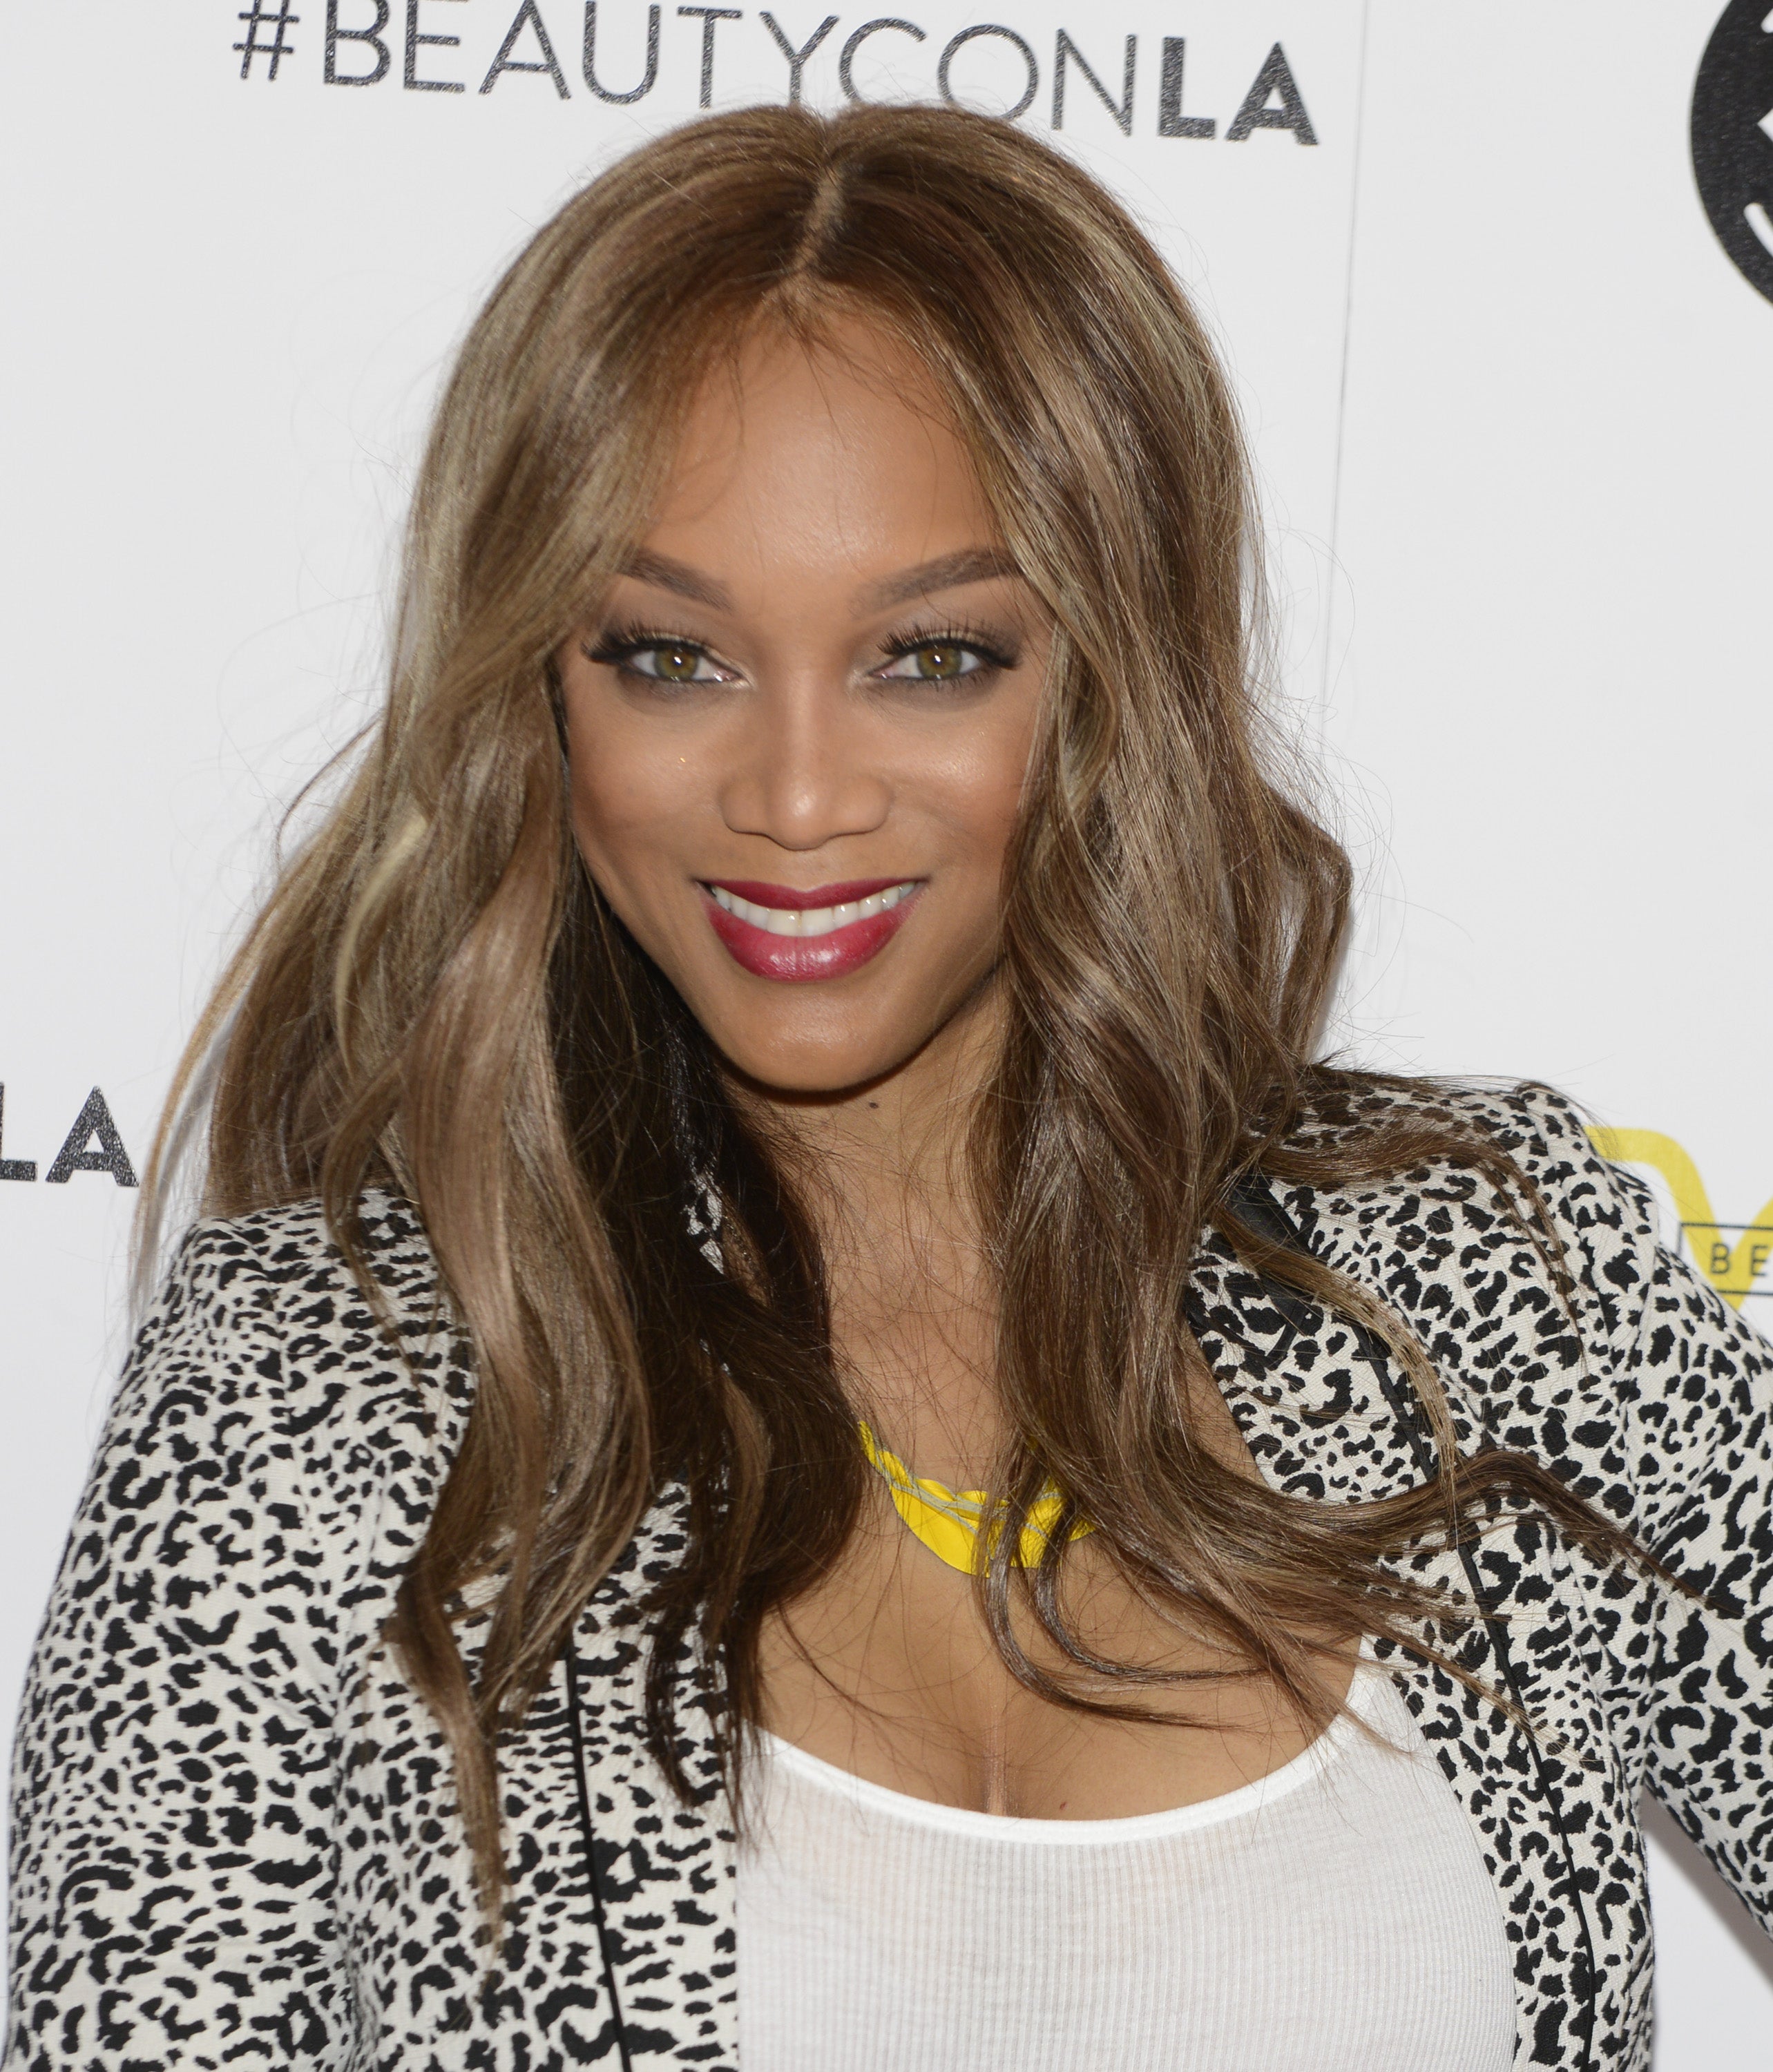 Tyra Banks Is Replacing Nick Cannon As 'America’s Got Talent' Host
